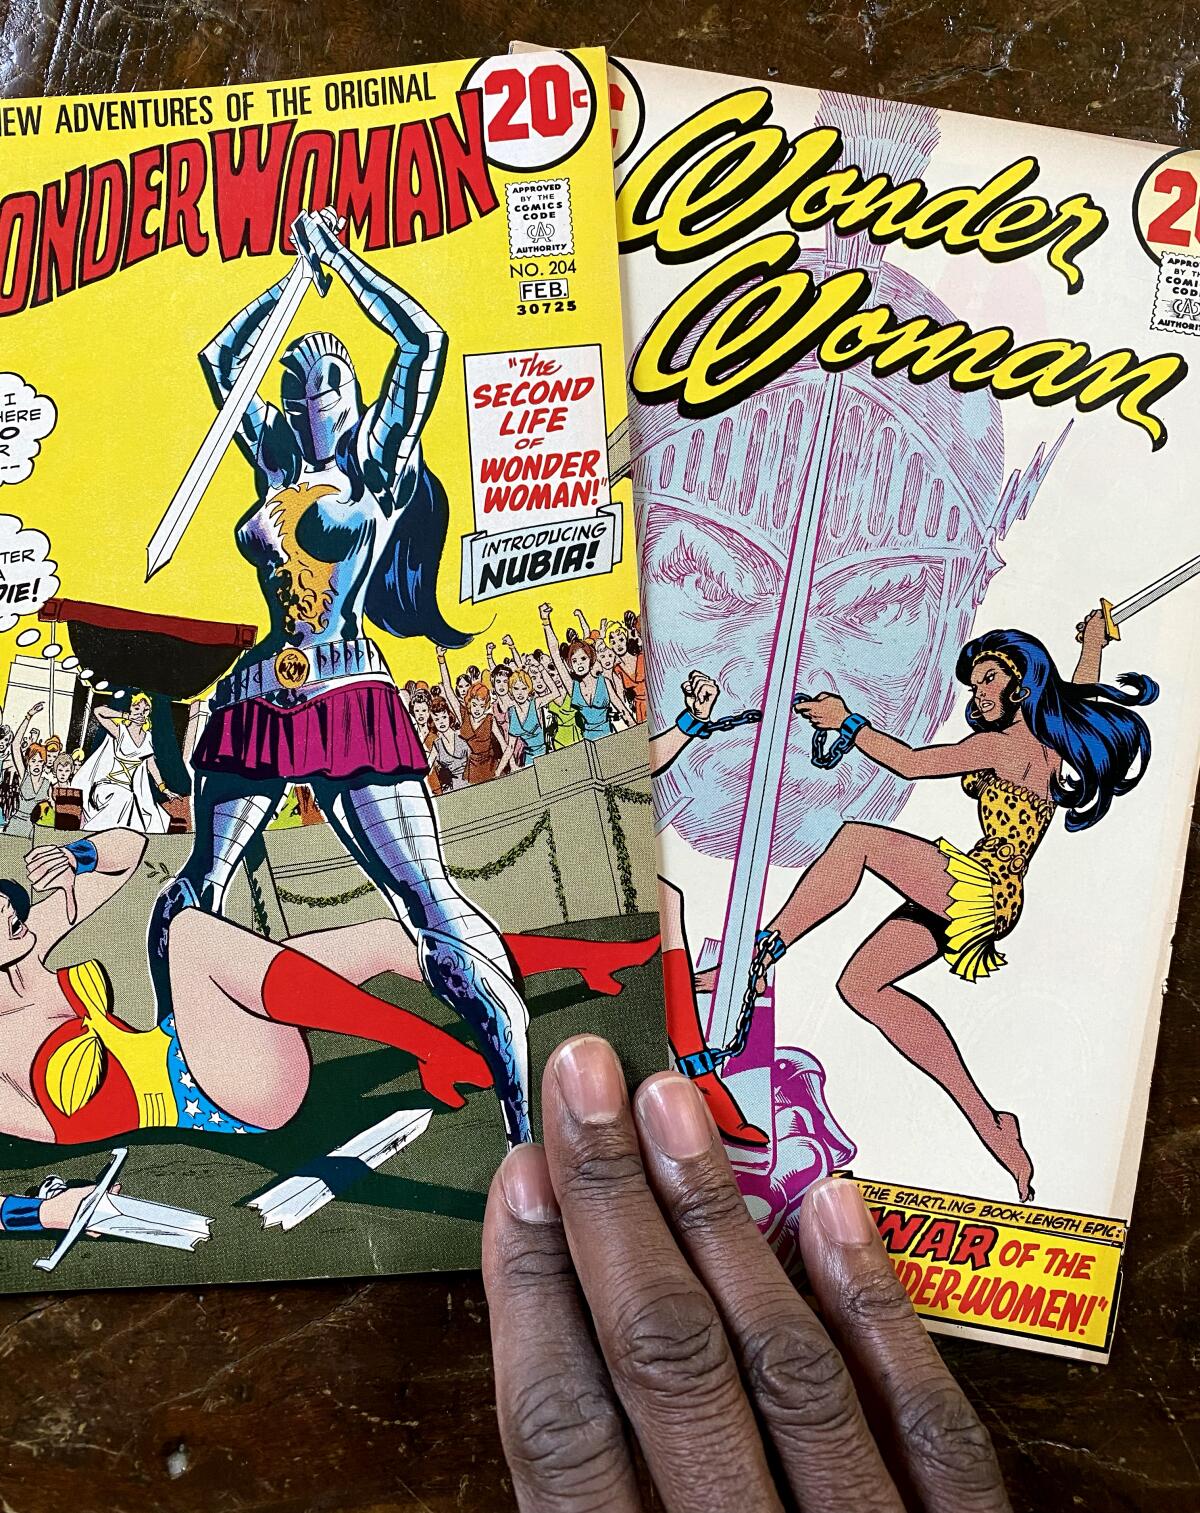 Wonder Woman comic book covers from the 1970s that feature Nubia.